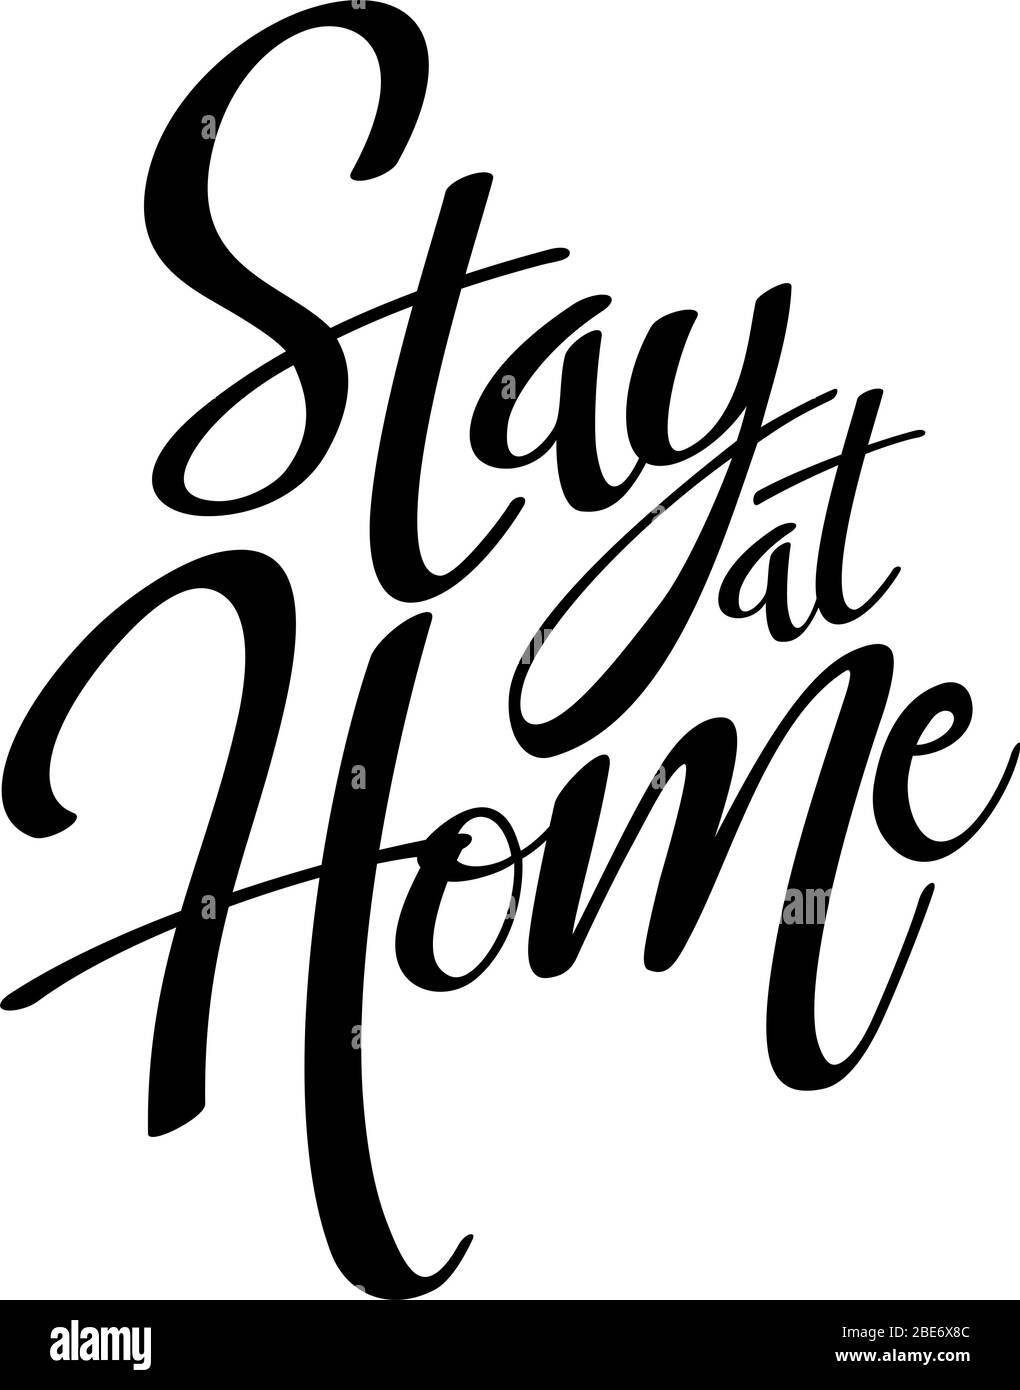 Stay at Home quote in black isolated on white background. Social distancing campaign during quarentine coronavirus pandemic Stock Vector